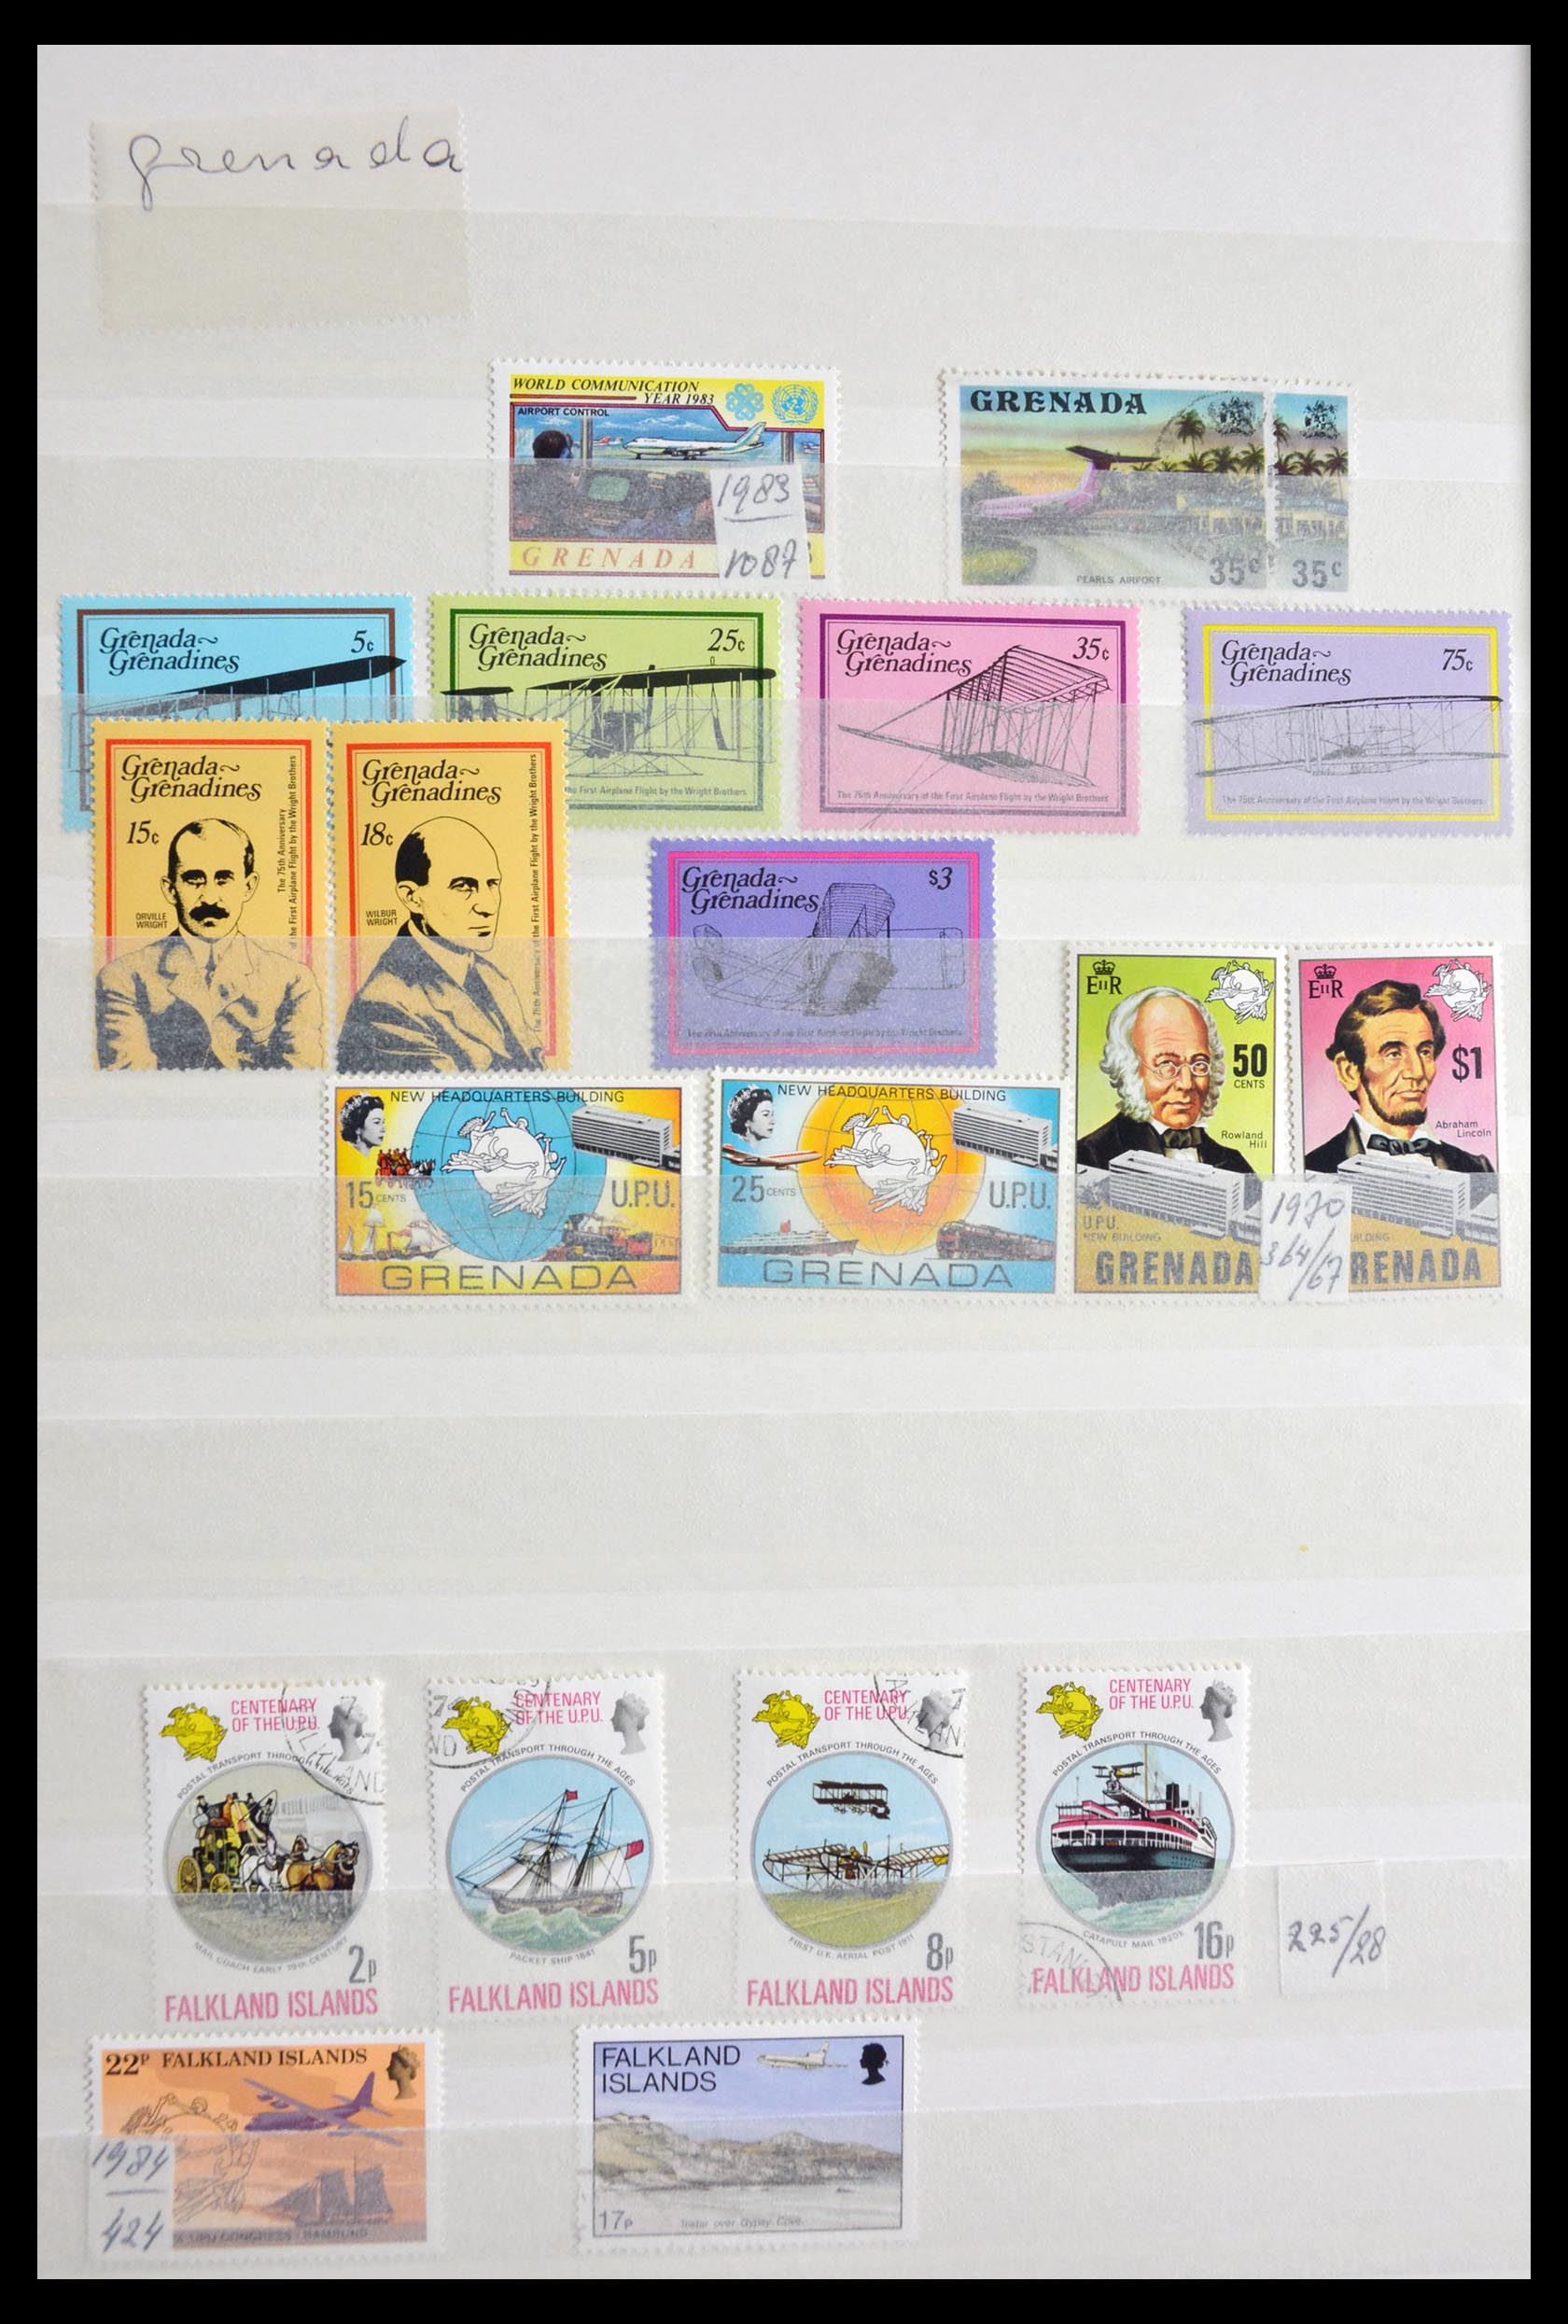 29917 062 - 29917 Latin America airmail stamps.